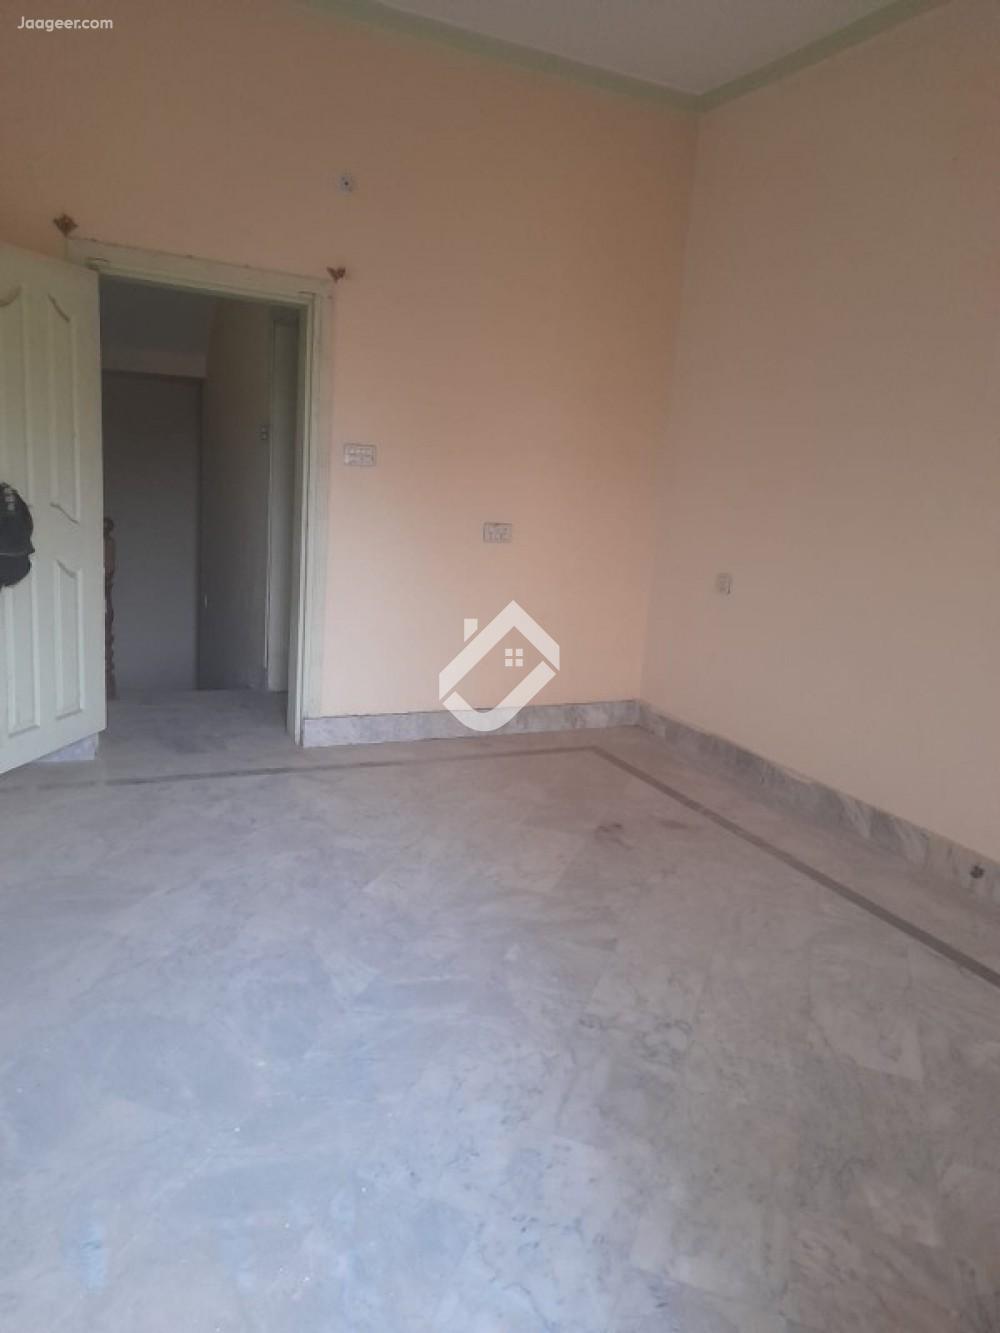 2.5 Marla Double Storey House For Sale In Cheema Colony Link Queen's Road in Cheema Colony, Sargodha